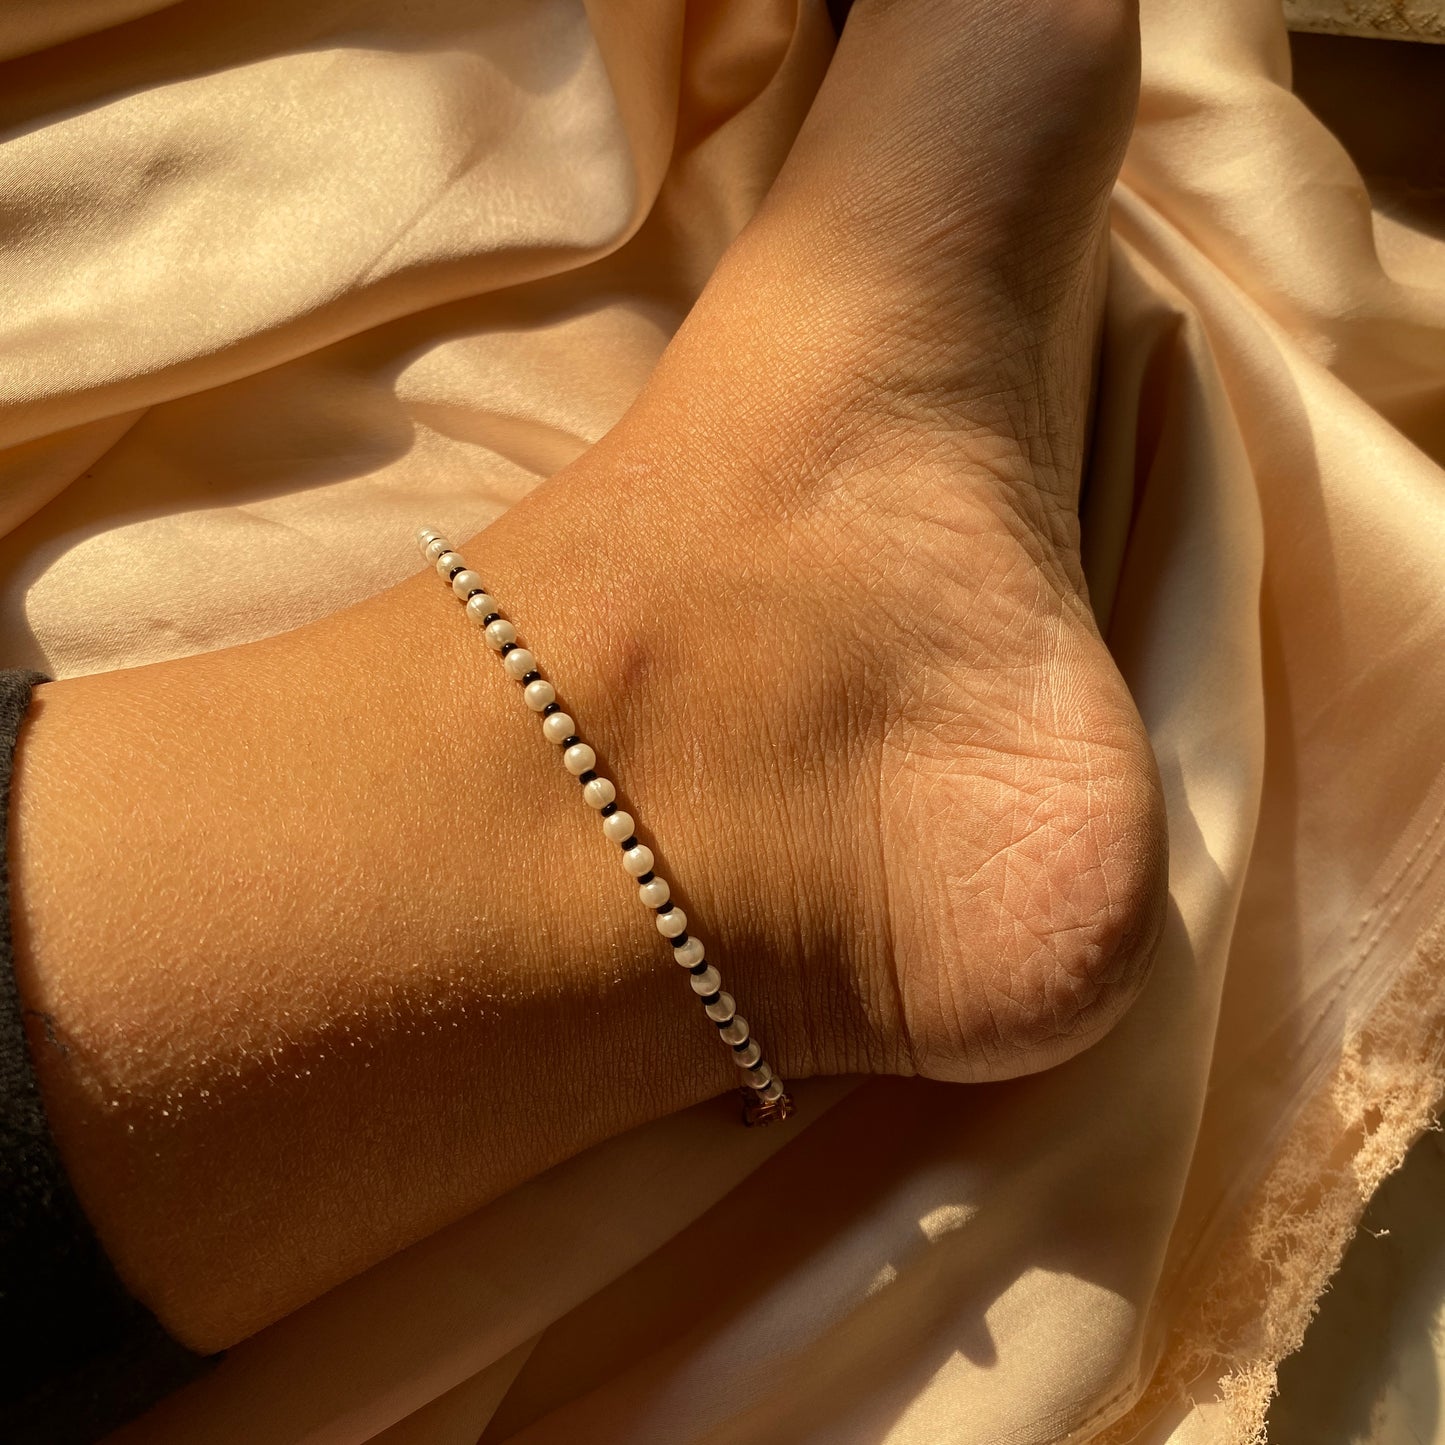 PEARL BEADED ANKLET